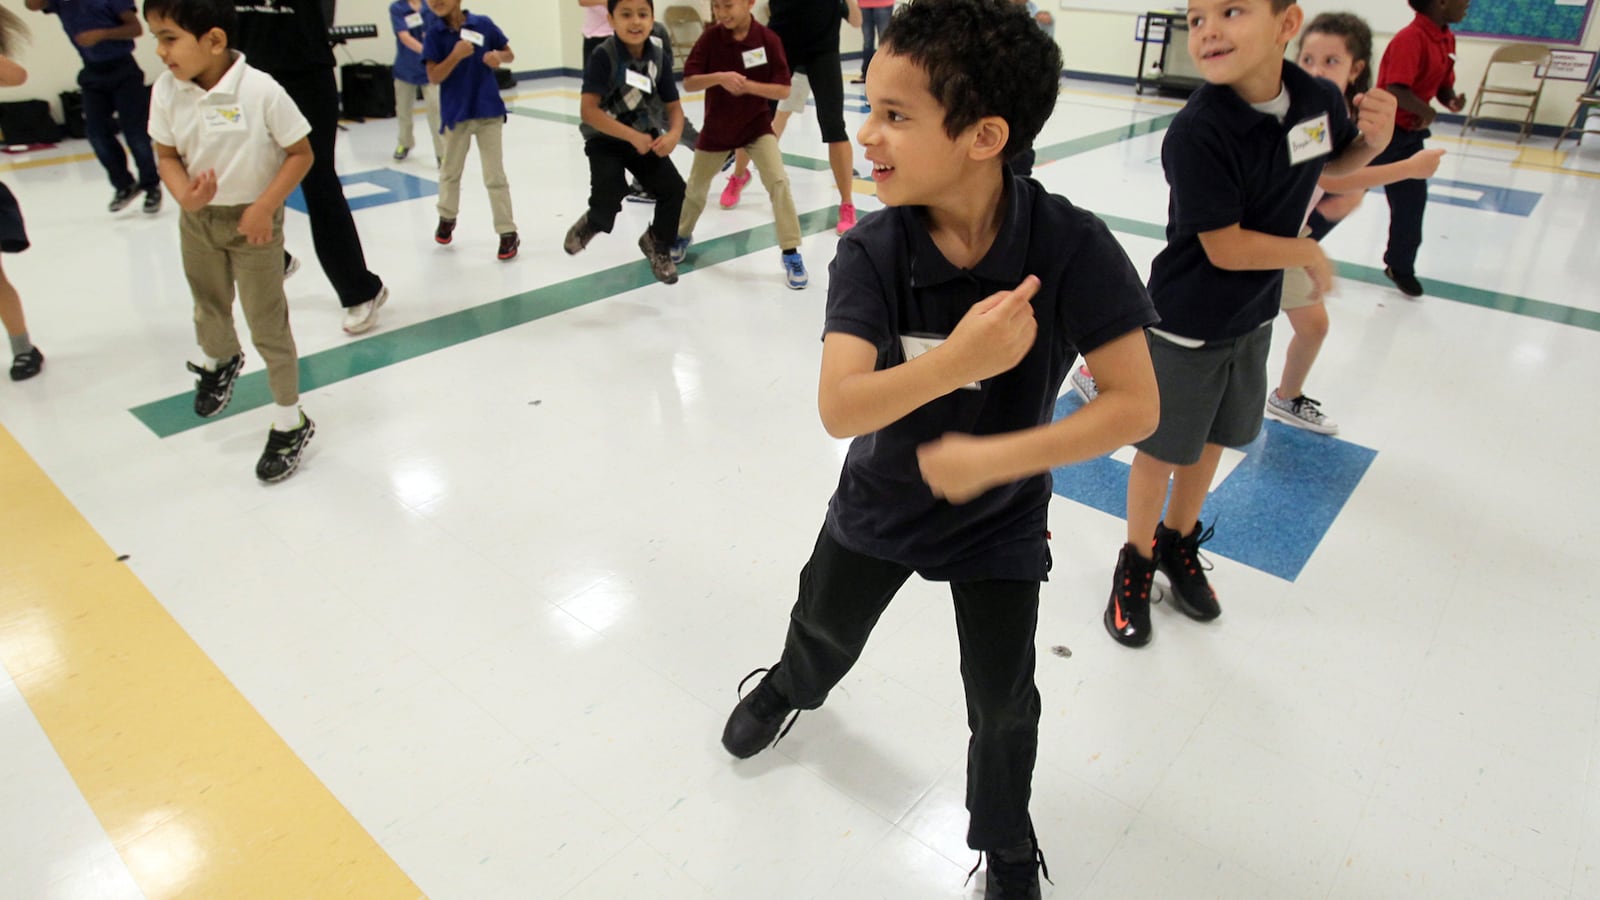 Third-grader Justin Willis, 7, center, dances with his classmates during an educational outreach program. (Mike Cardew/Akron Beacon Journal/TNS via Getty Images)